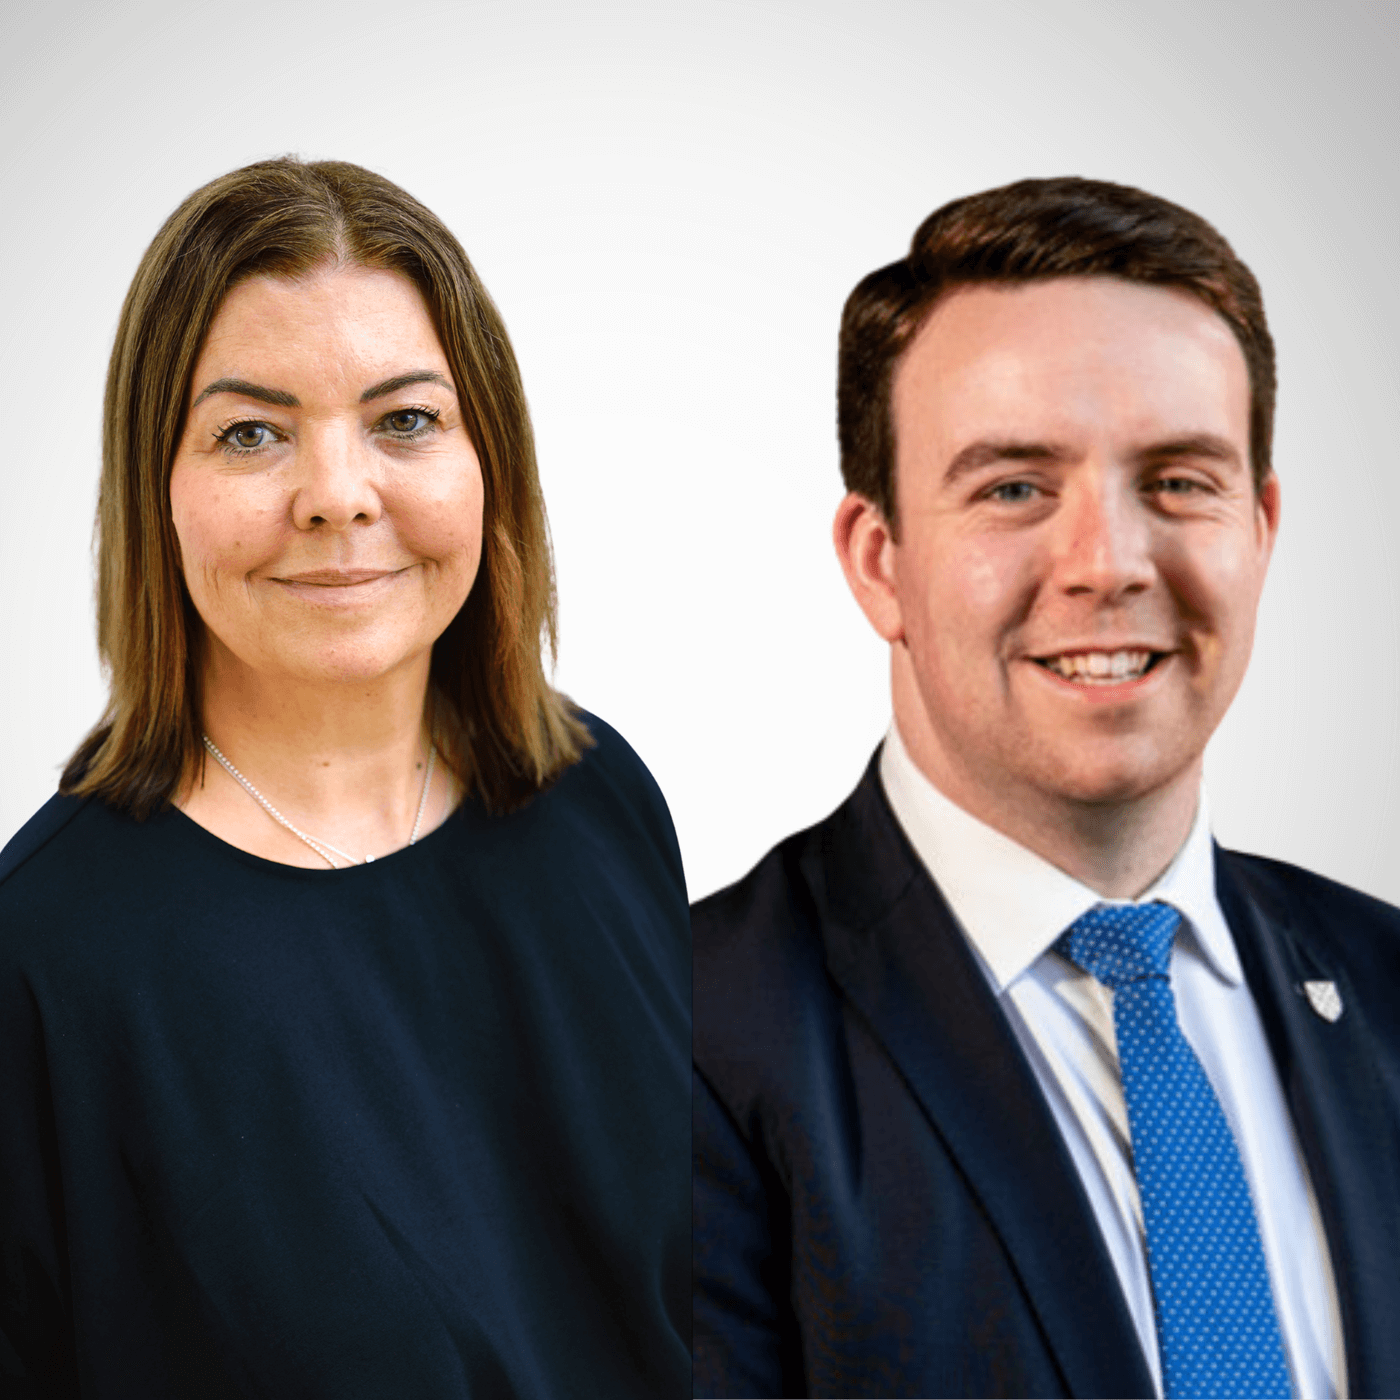 QUBIS APPOINTS TWO NEW BOARD MEMBERS AND NEW EXECUTIVE CHAIR 